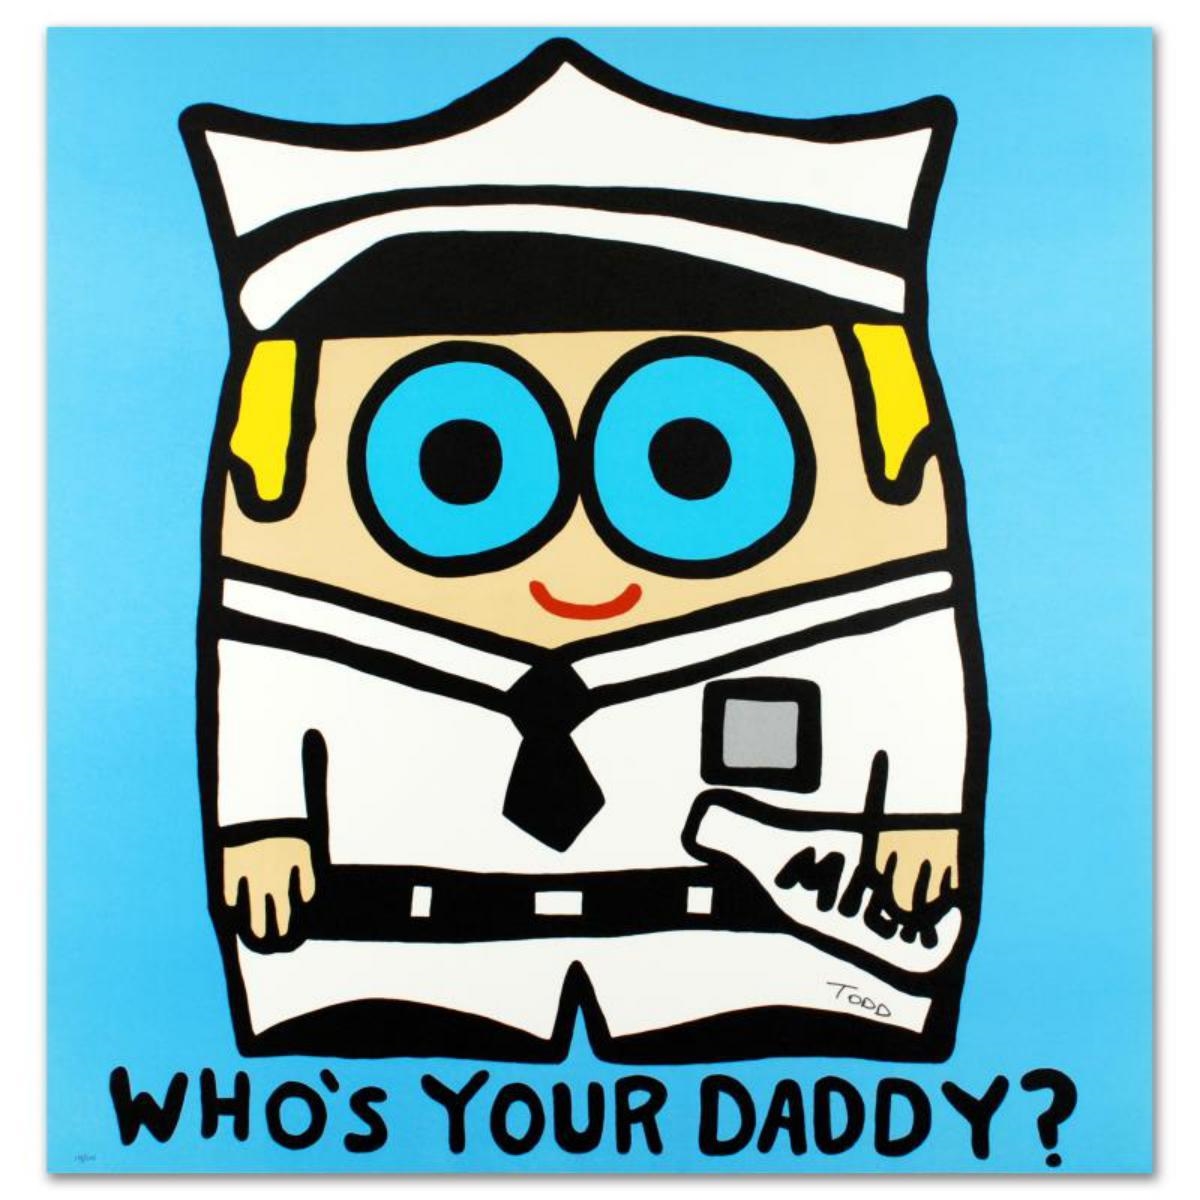 Who's Your Daddy - Todd Goldman